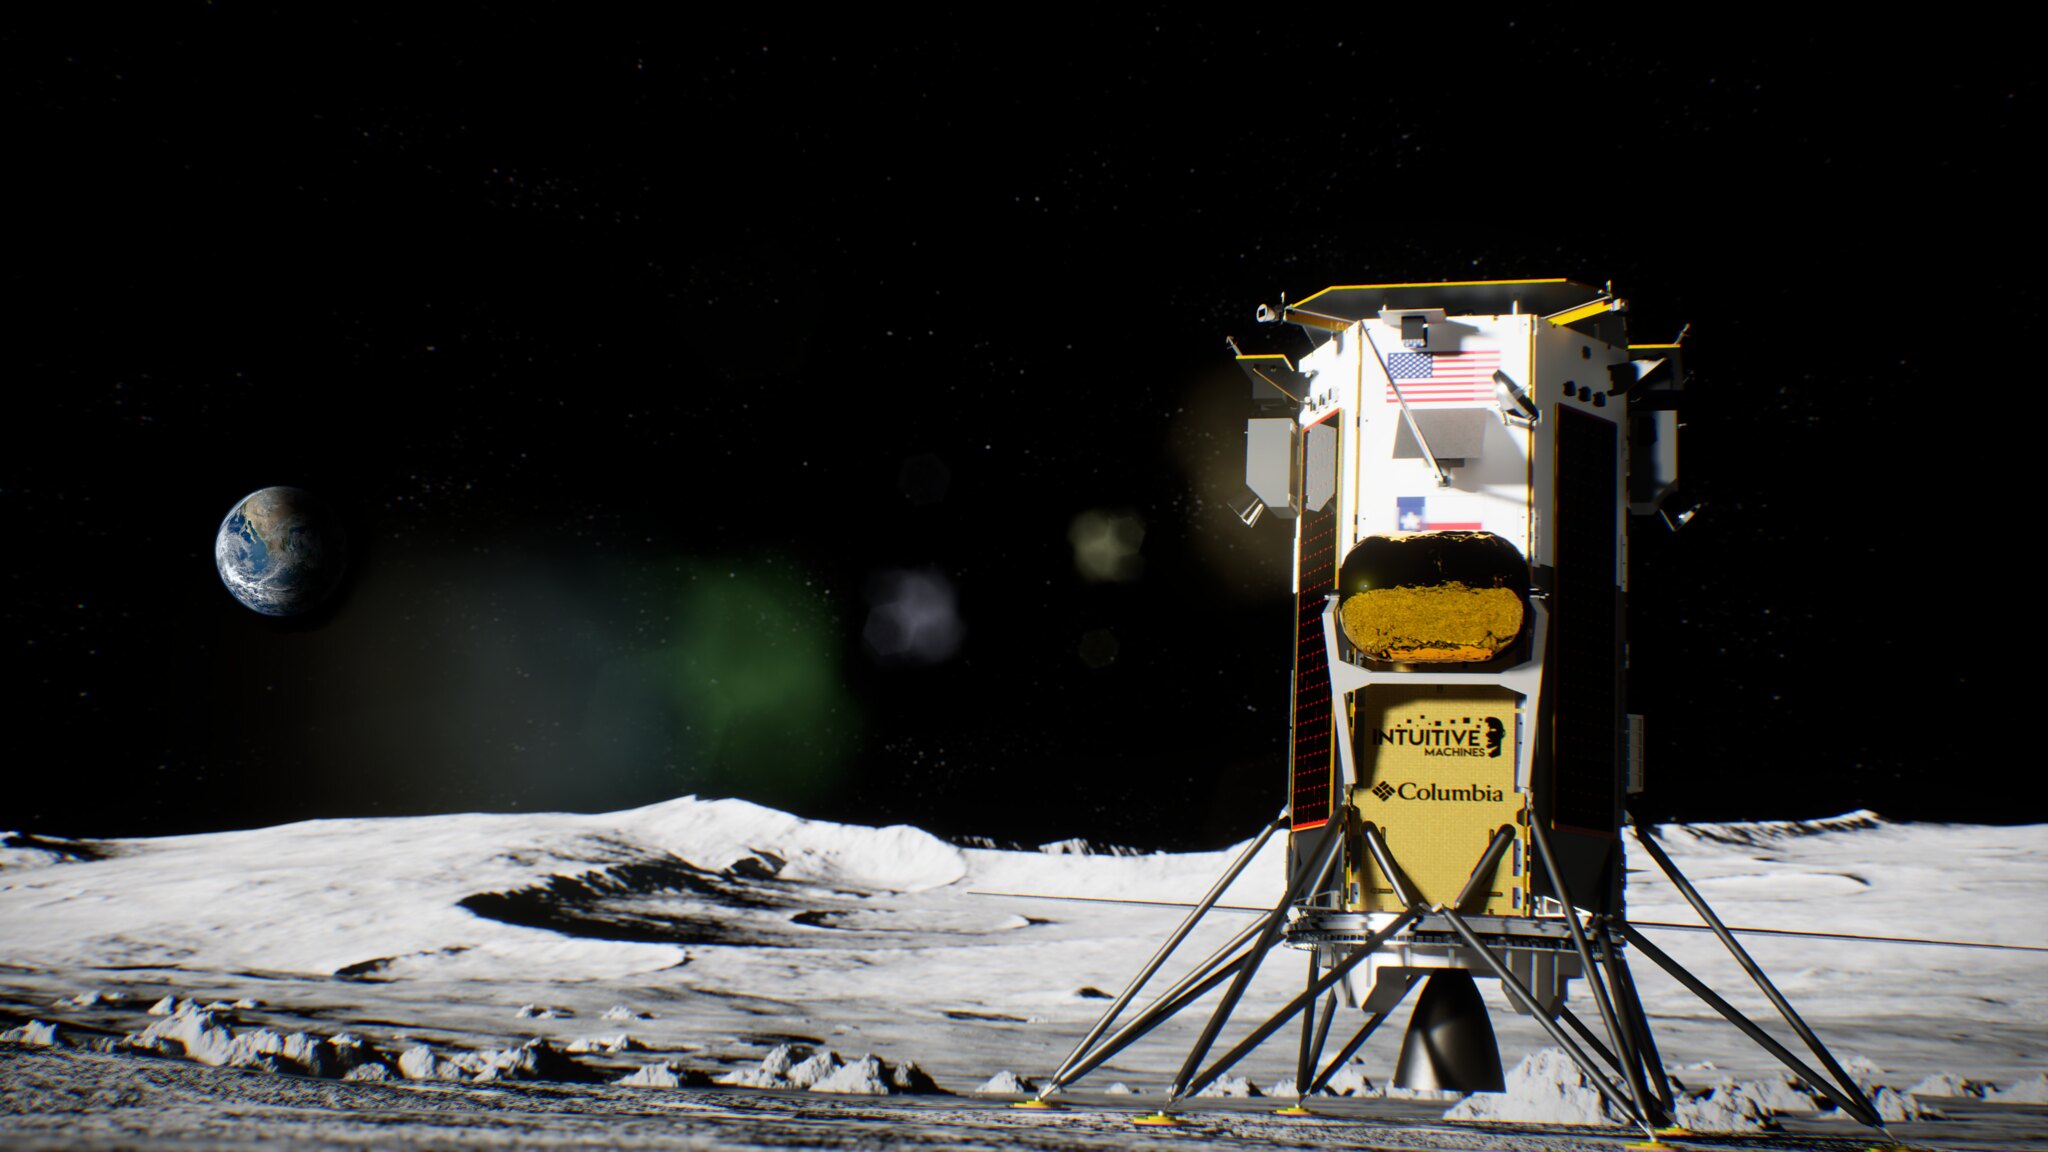 A rendering of Intuitive Machines' Nova-C lander on the surface of the Moon with Earth visible in the background